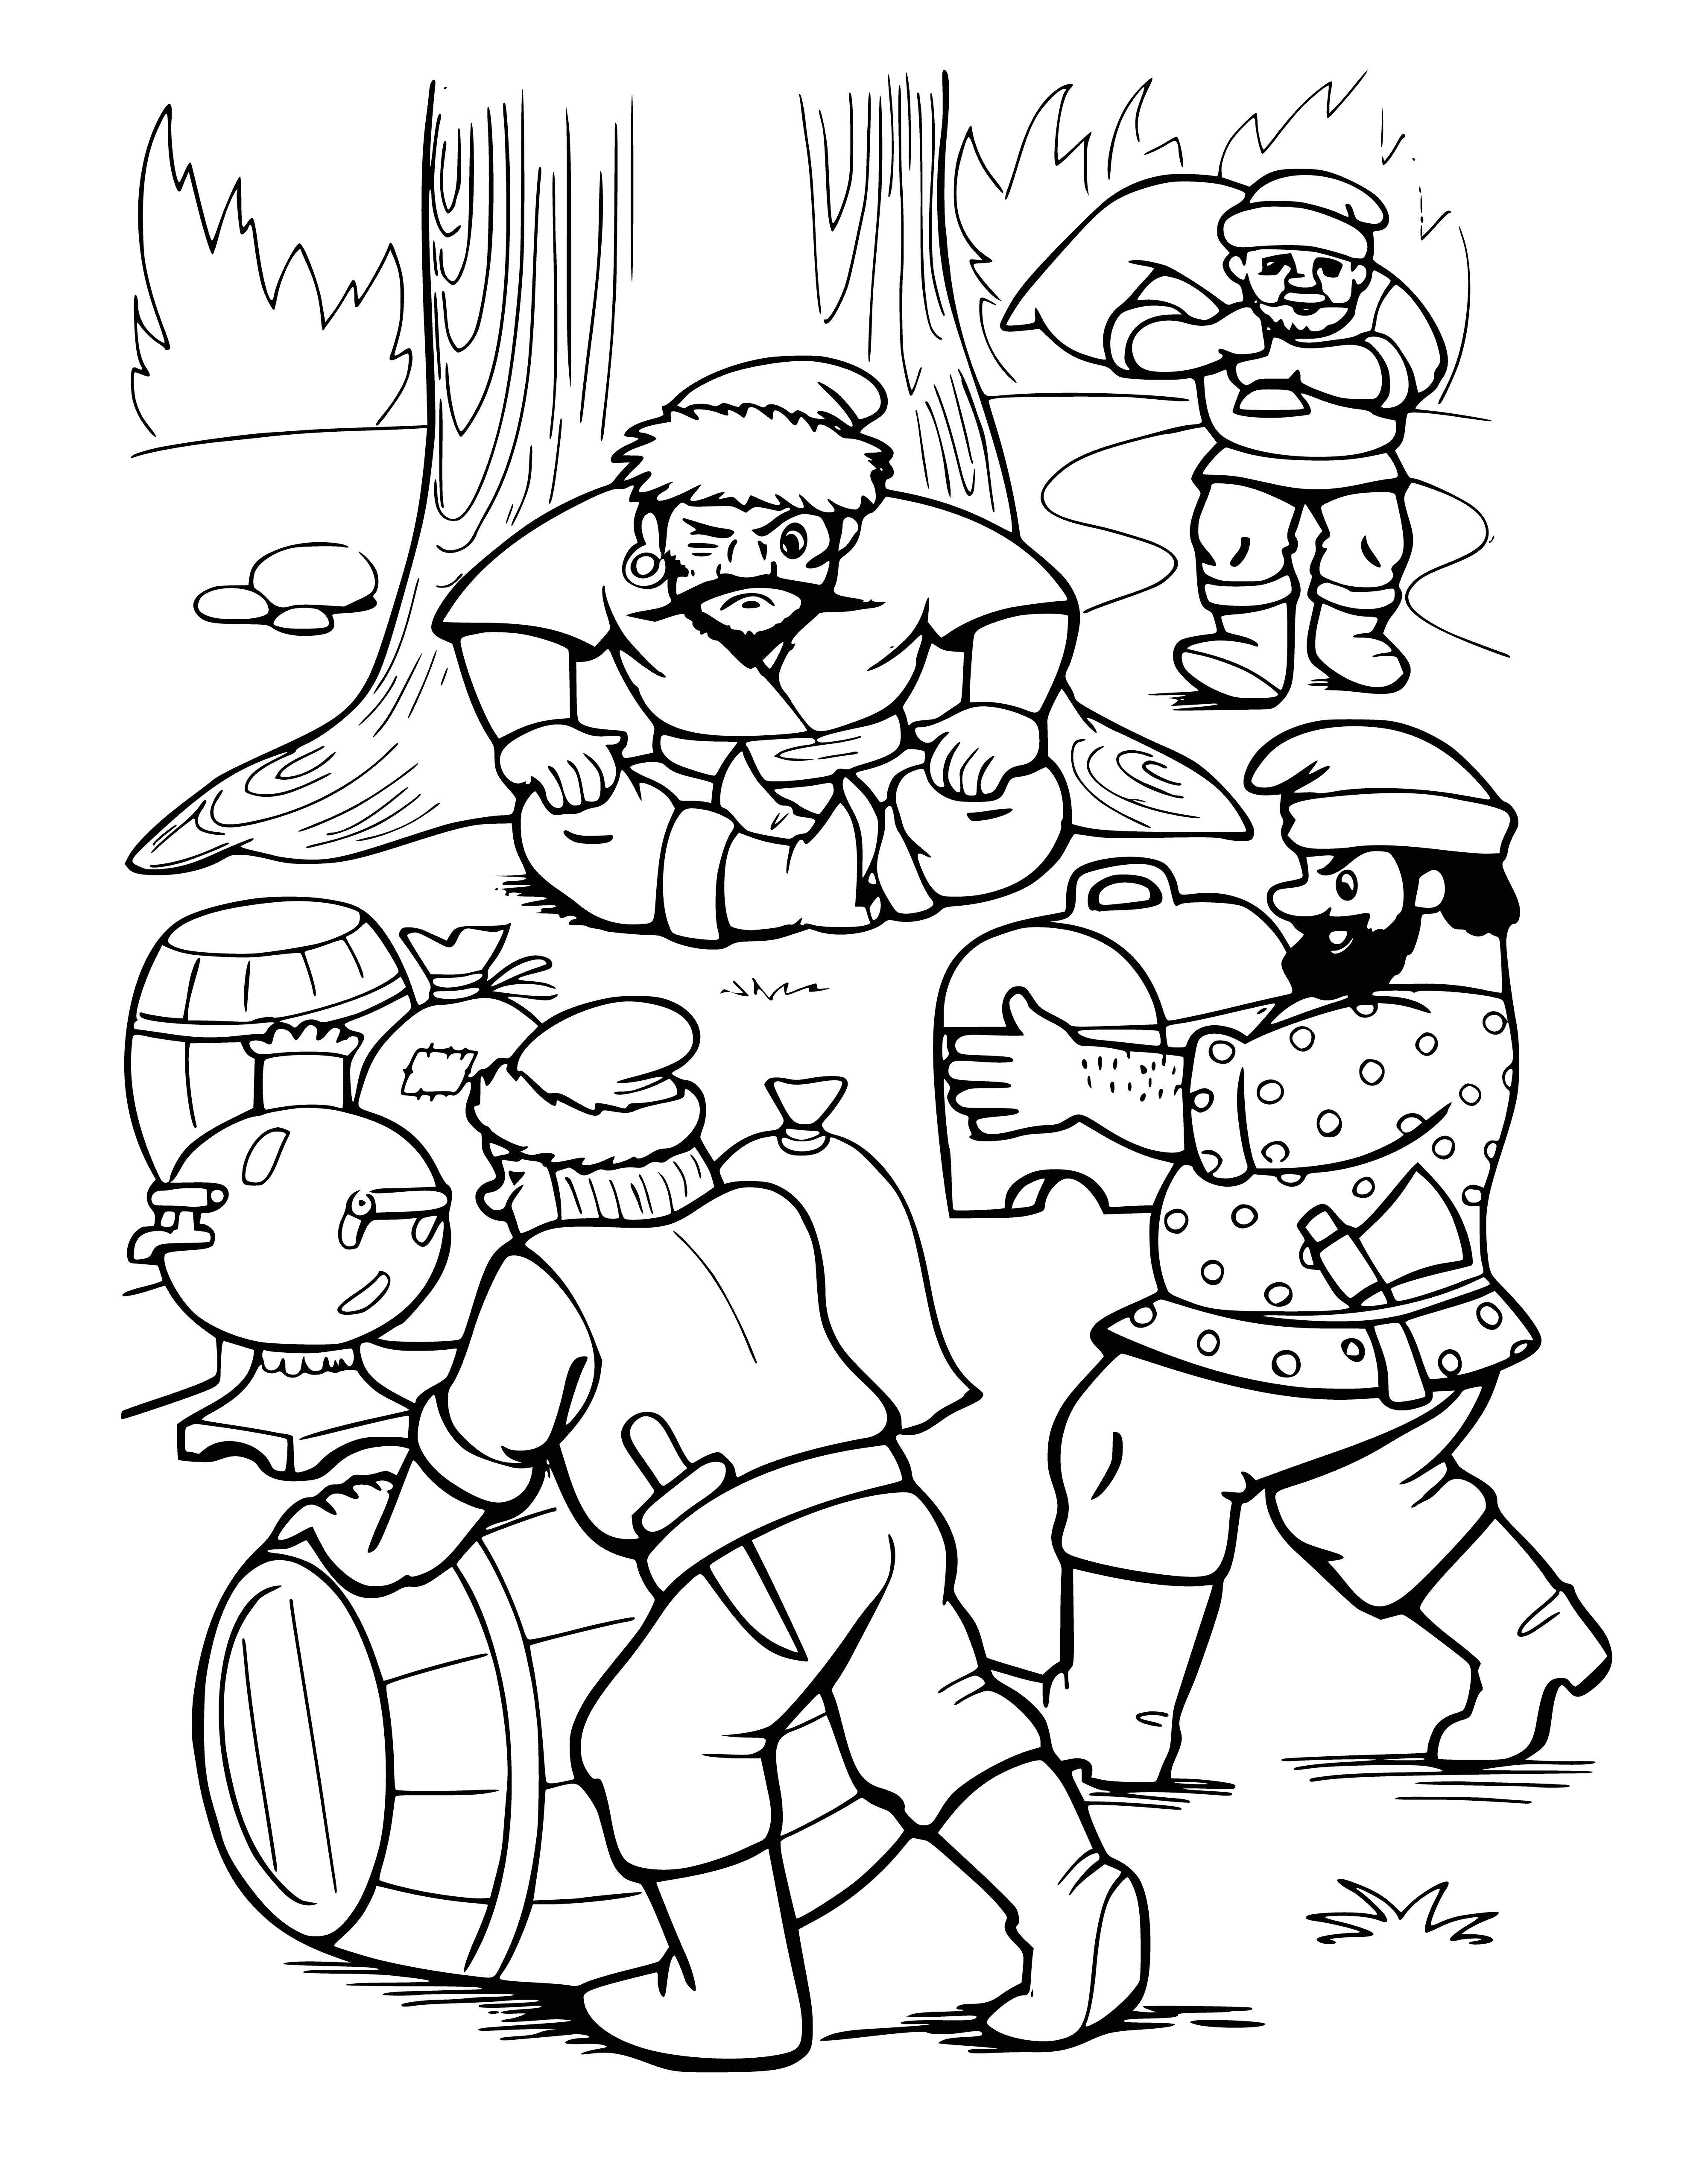 coloring page: 3 people in getaway, holding stolen goods. 2 looking away from camera, 1 looking directly at it.